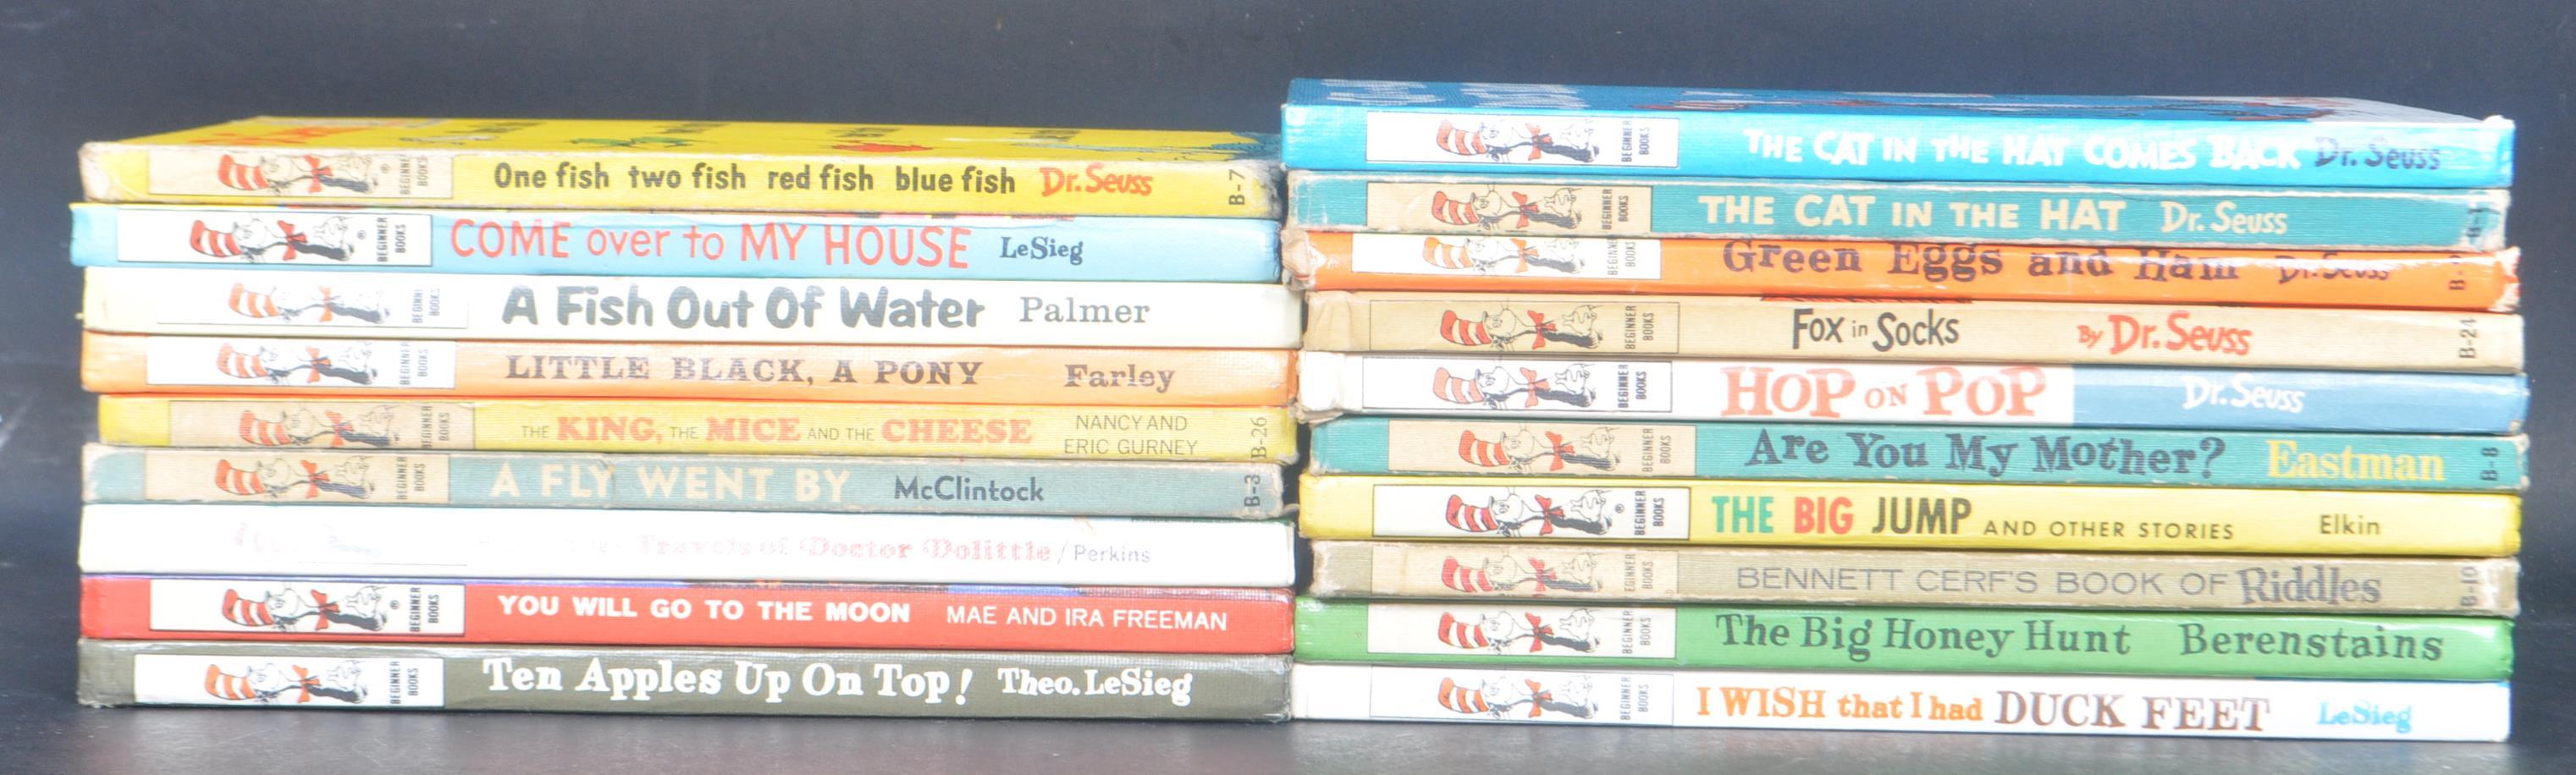 COLLECTION OF 19 DR SEUSS BEGINNER BOOKS CLUB EDITION